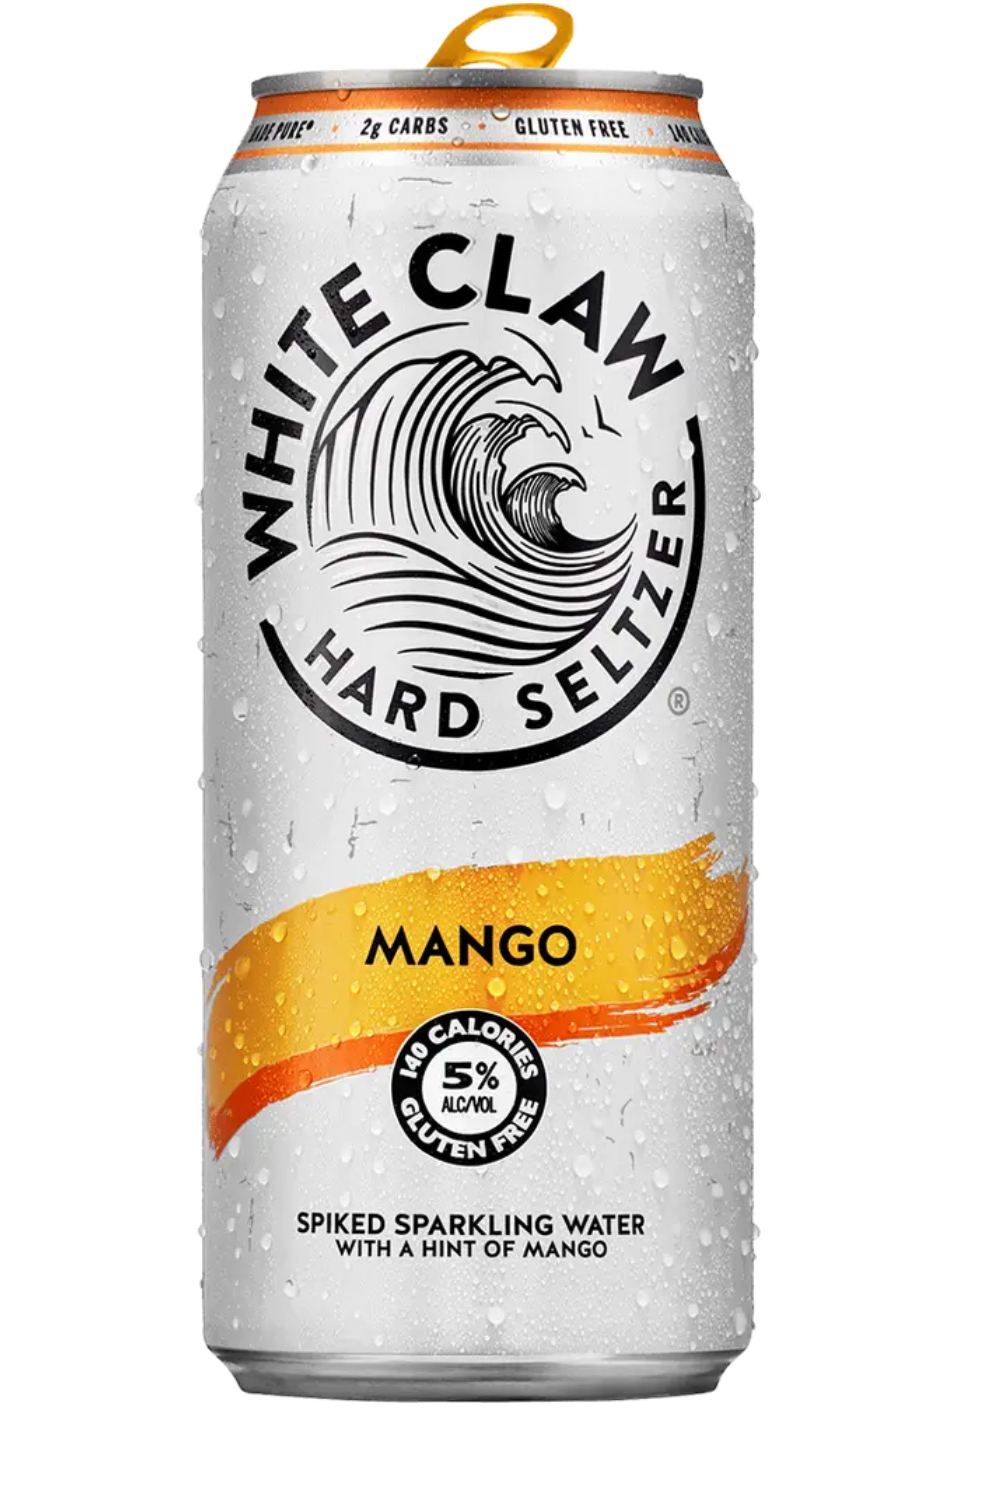 'White Claw' Drinking School Bus Driver Claims Chemo Affected Ability To Taste Alcohol